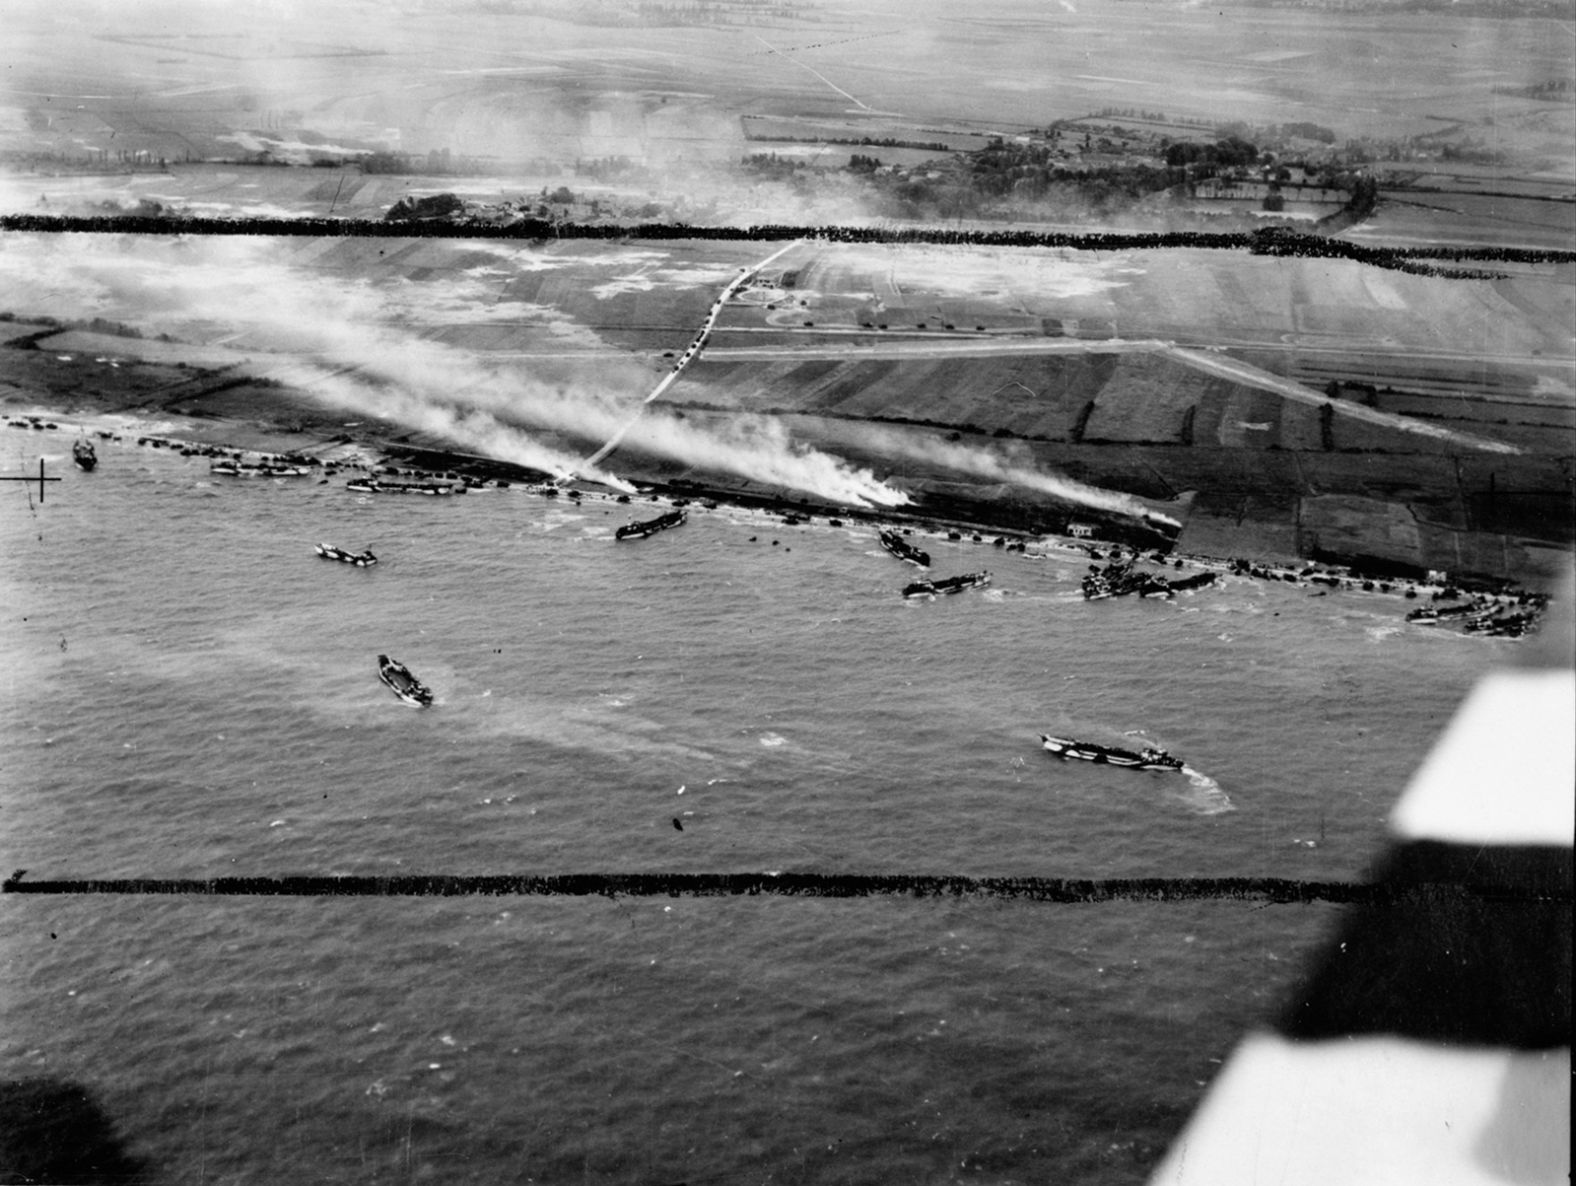 The British Army's 50th Infantry Division lands on beaches in Normandy. Allied troops landed on five stretches of the Normandy coastline that were code-named Utah, Omaha, Gold, Juno and Sword.